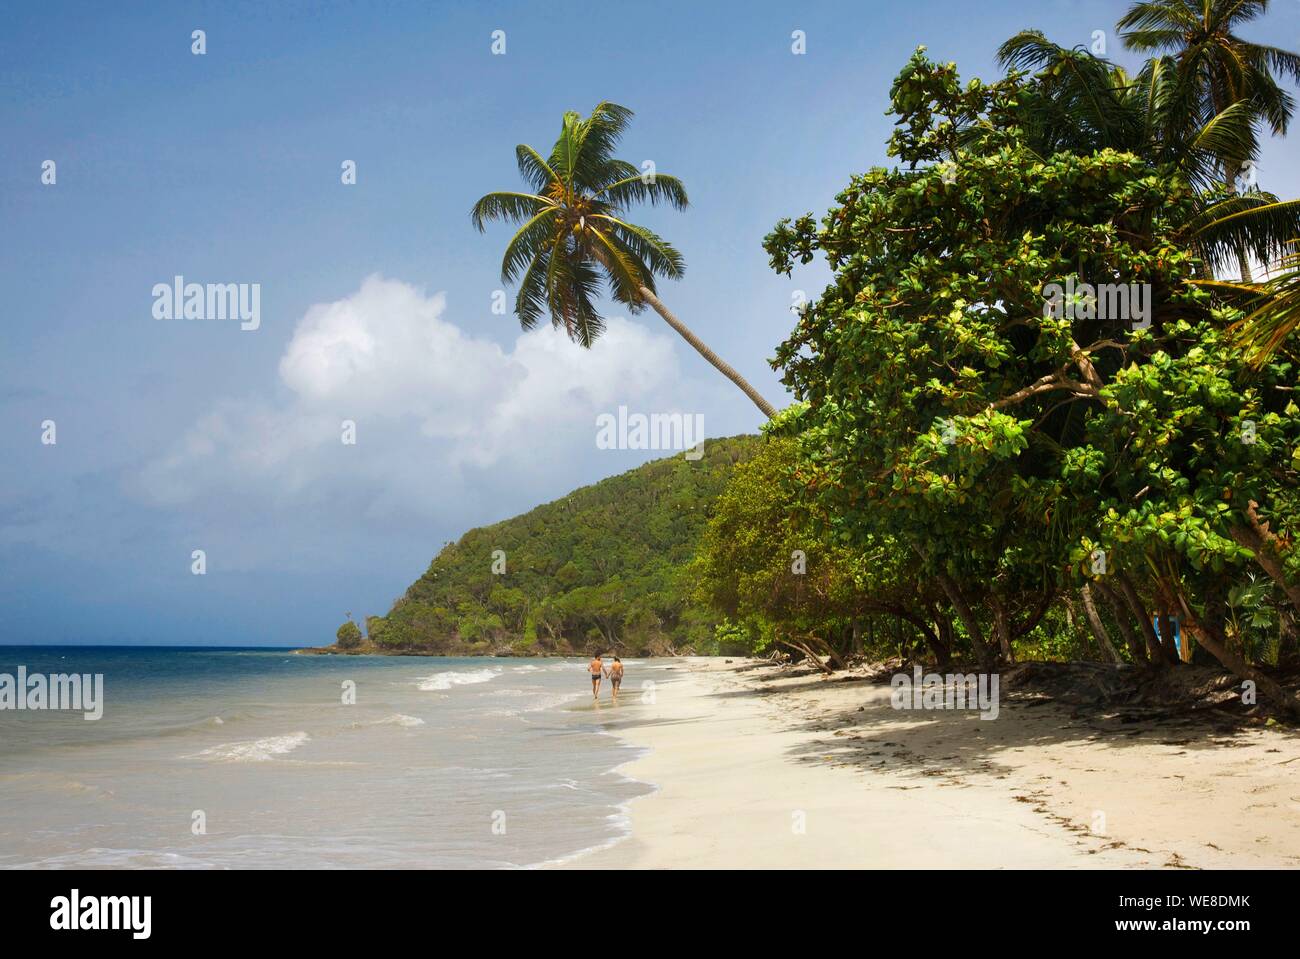 Colombia, Providencia island, couple walking on the beach of Manzanillo lined with tall coconut trees and bathed by the Caribbean Sea Stock Photo